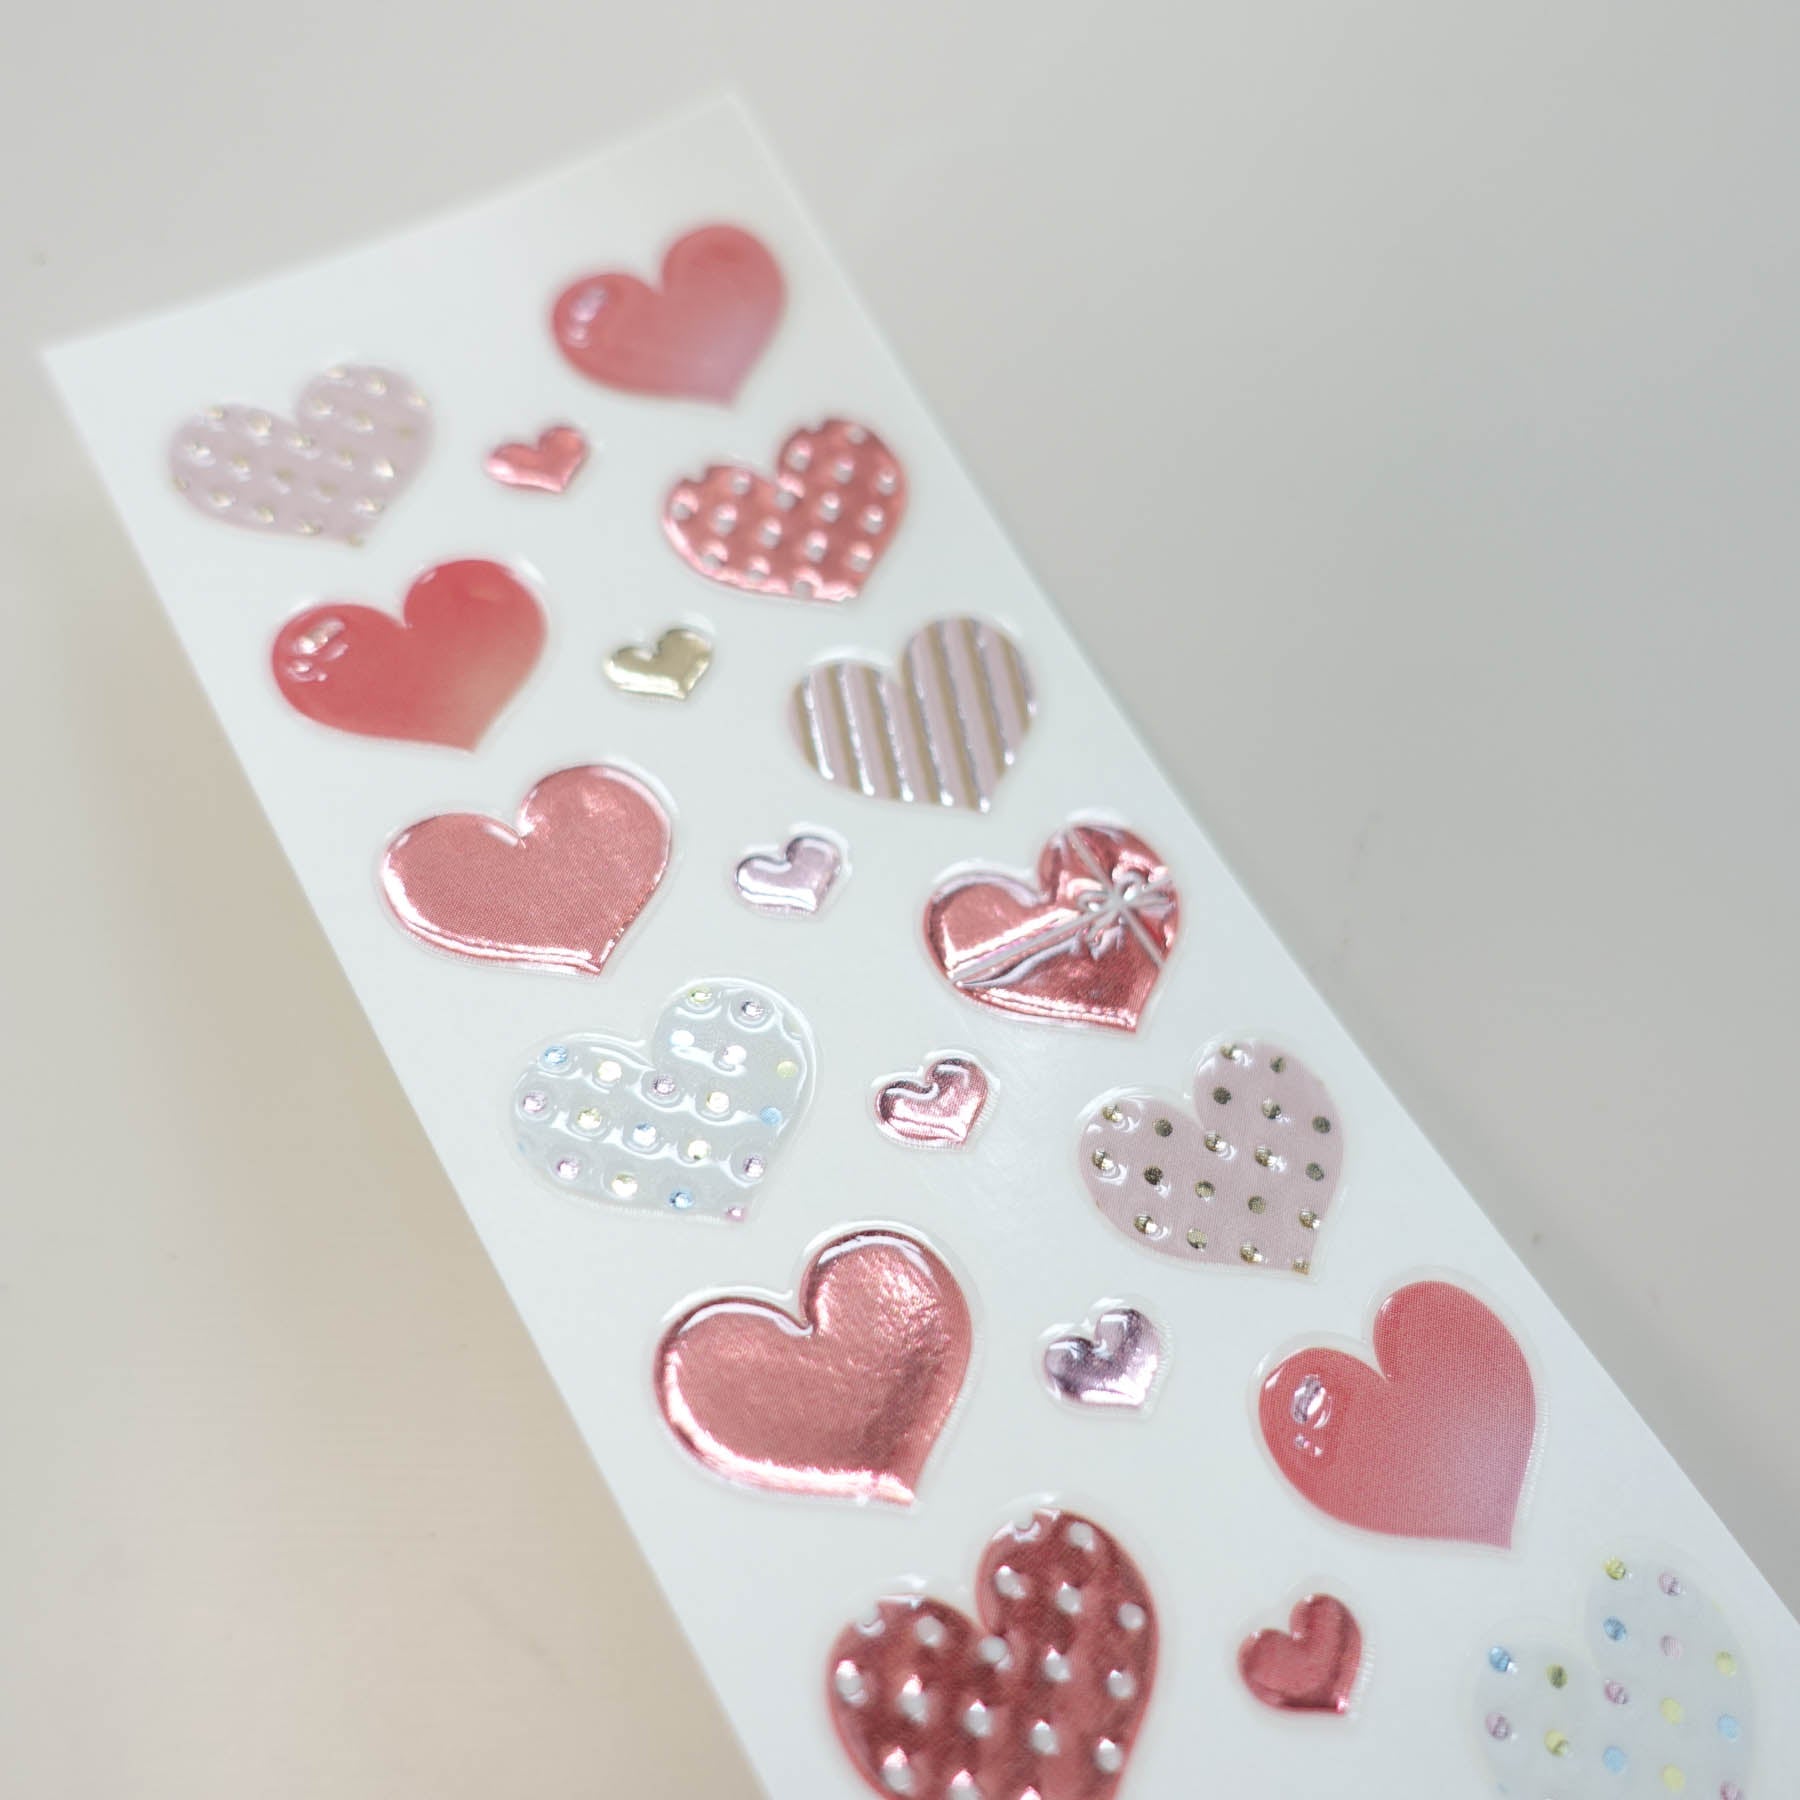 Assorted Polkadot Striped Love Hearts Clear-Backed Decorative Stickers Sheet